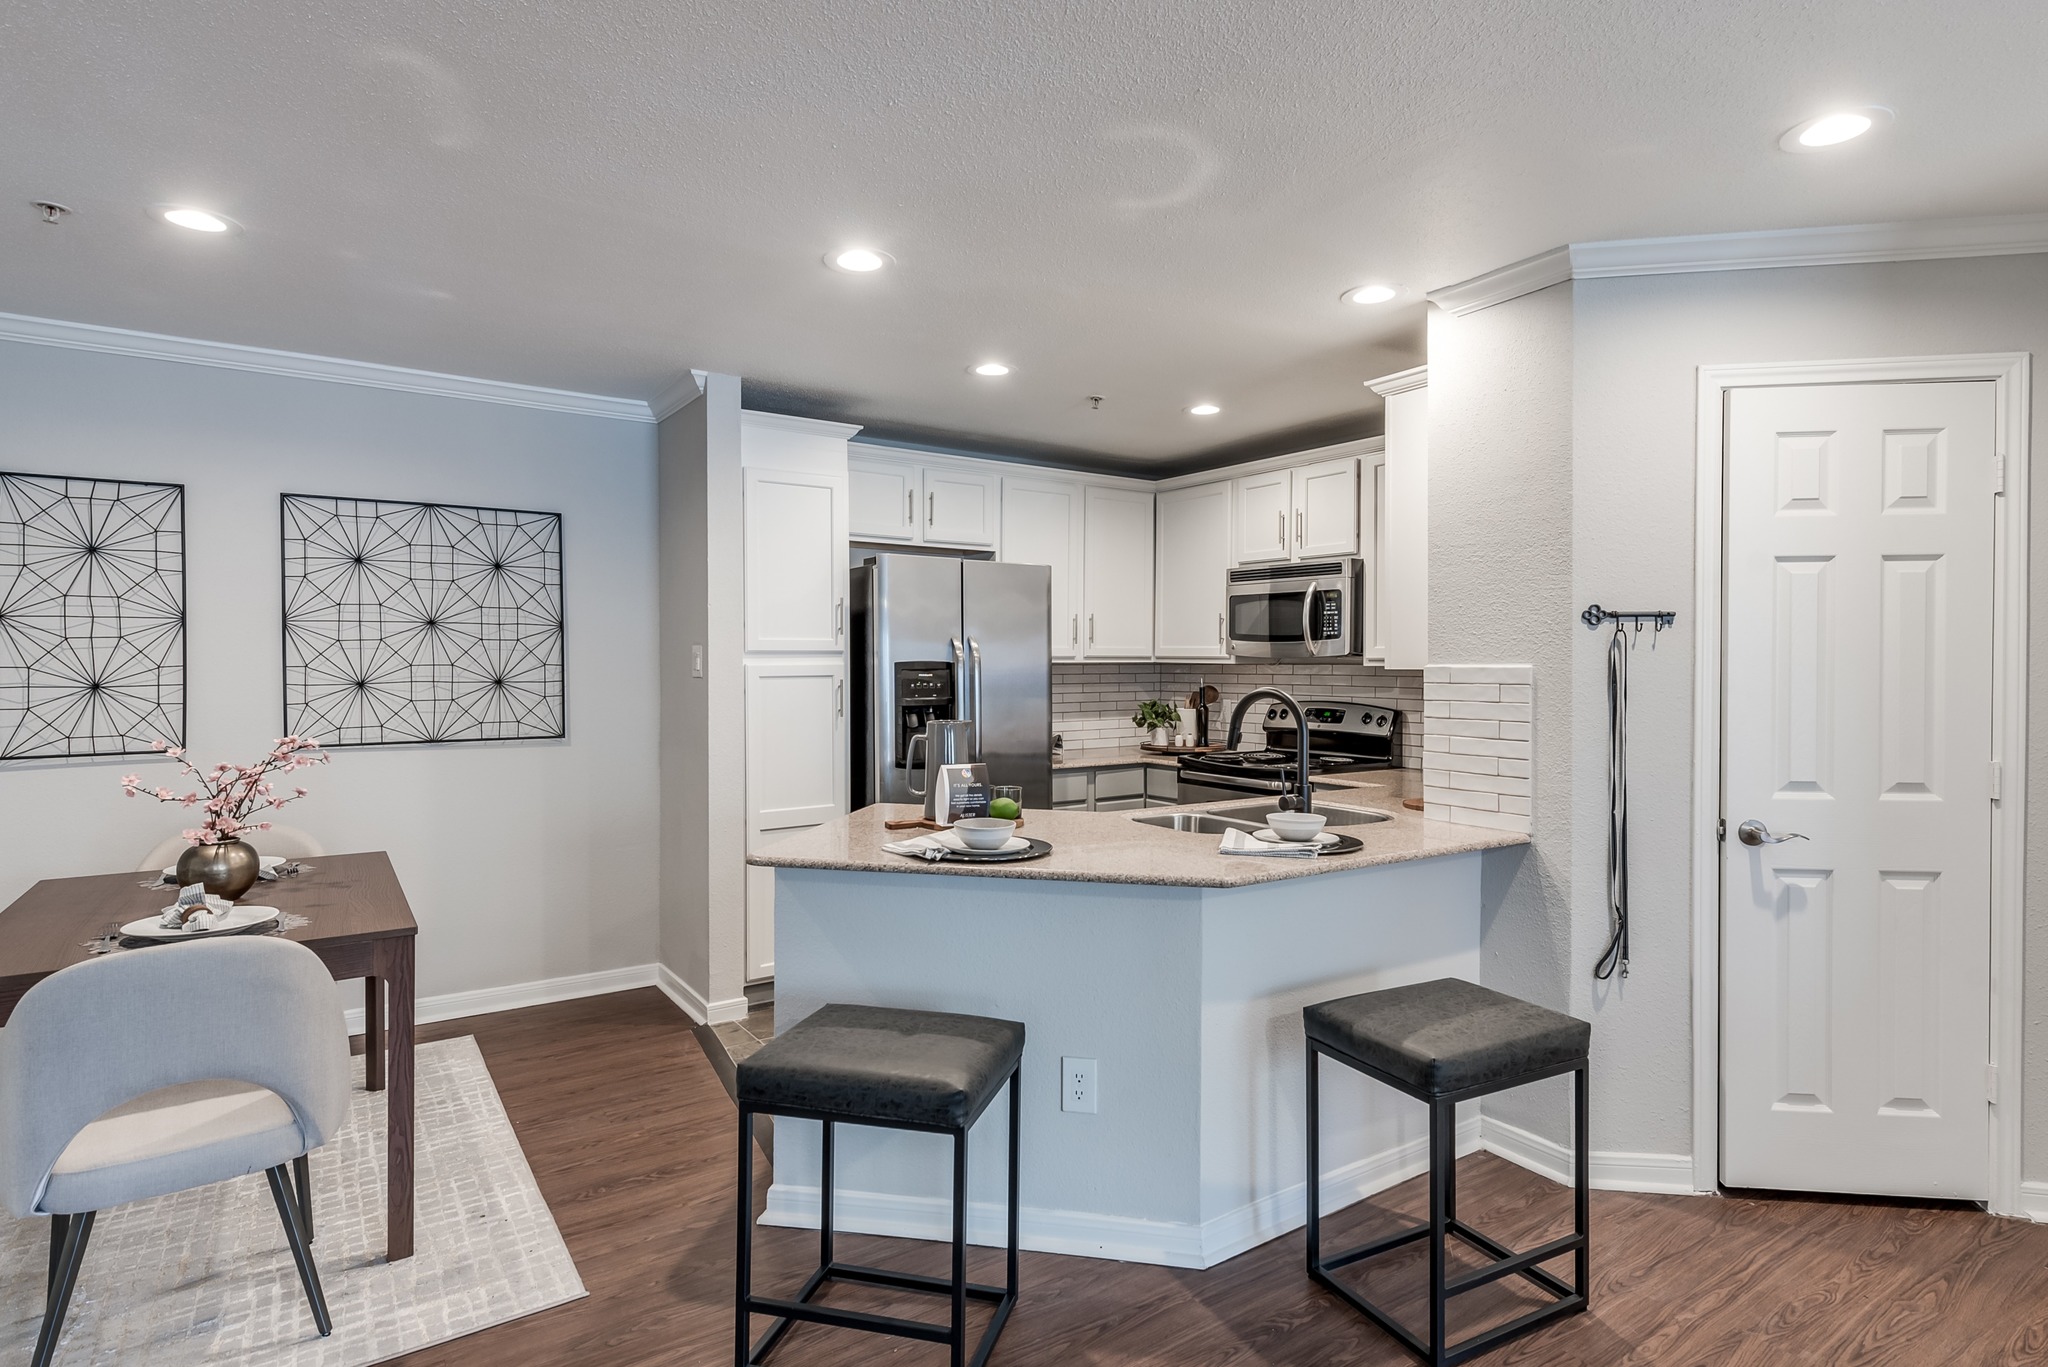 Kitchen with island seating and high-end appliances at Alister Galleria apartments houston texas